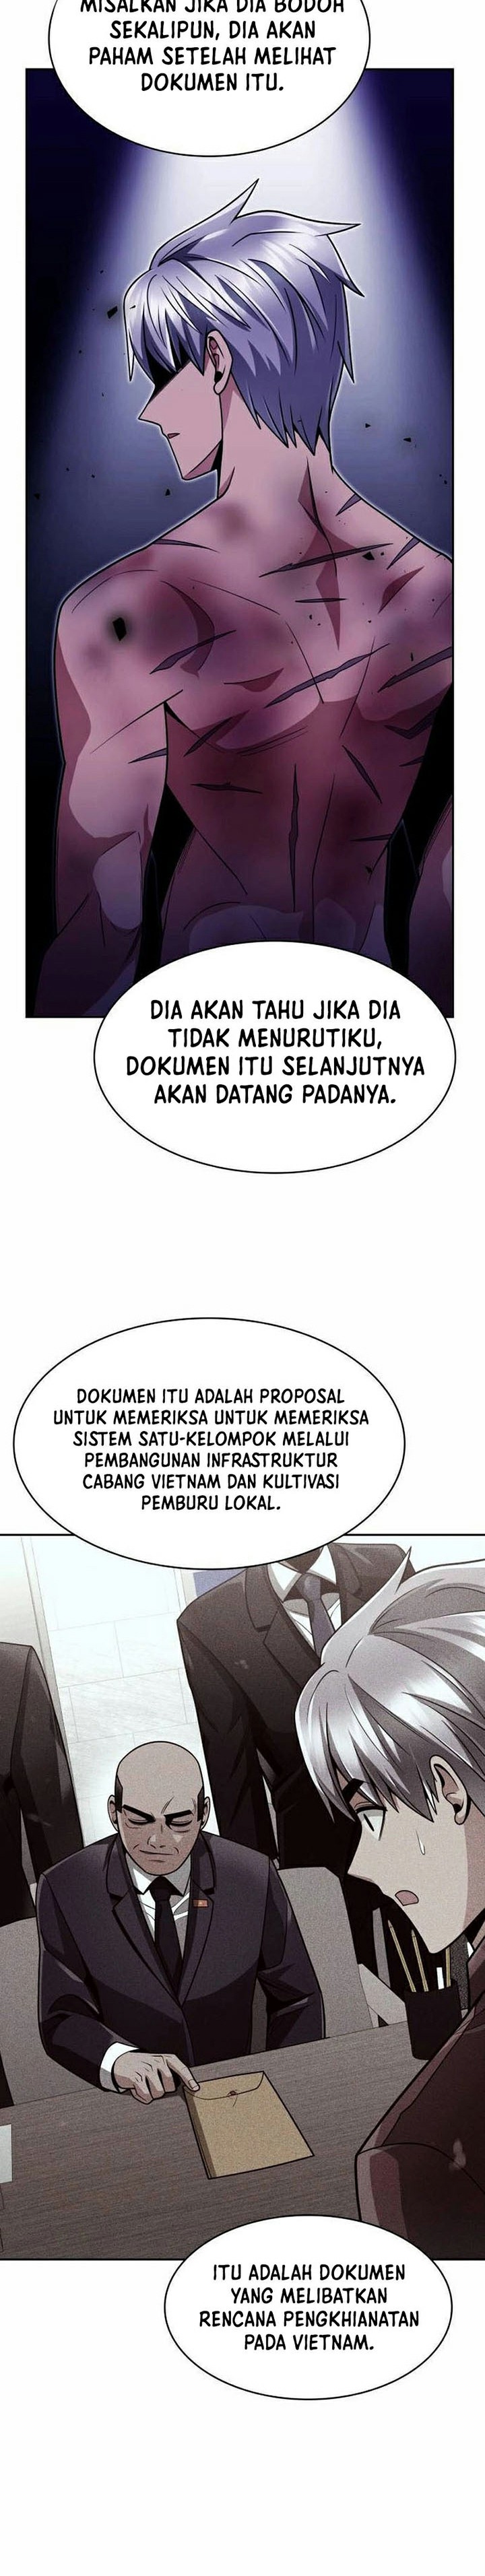 Dilarang COPAS - situs resmi www.mangacanblog.com - Komik clever cleaning life of the returned genius hunter 062 - chapter 62 63 Indonesia clever cleaning life of the returned genius hunter 062 - chapter 62 Terbaru 32|Baca Manga Komik Indonesia|Mangacan